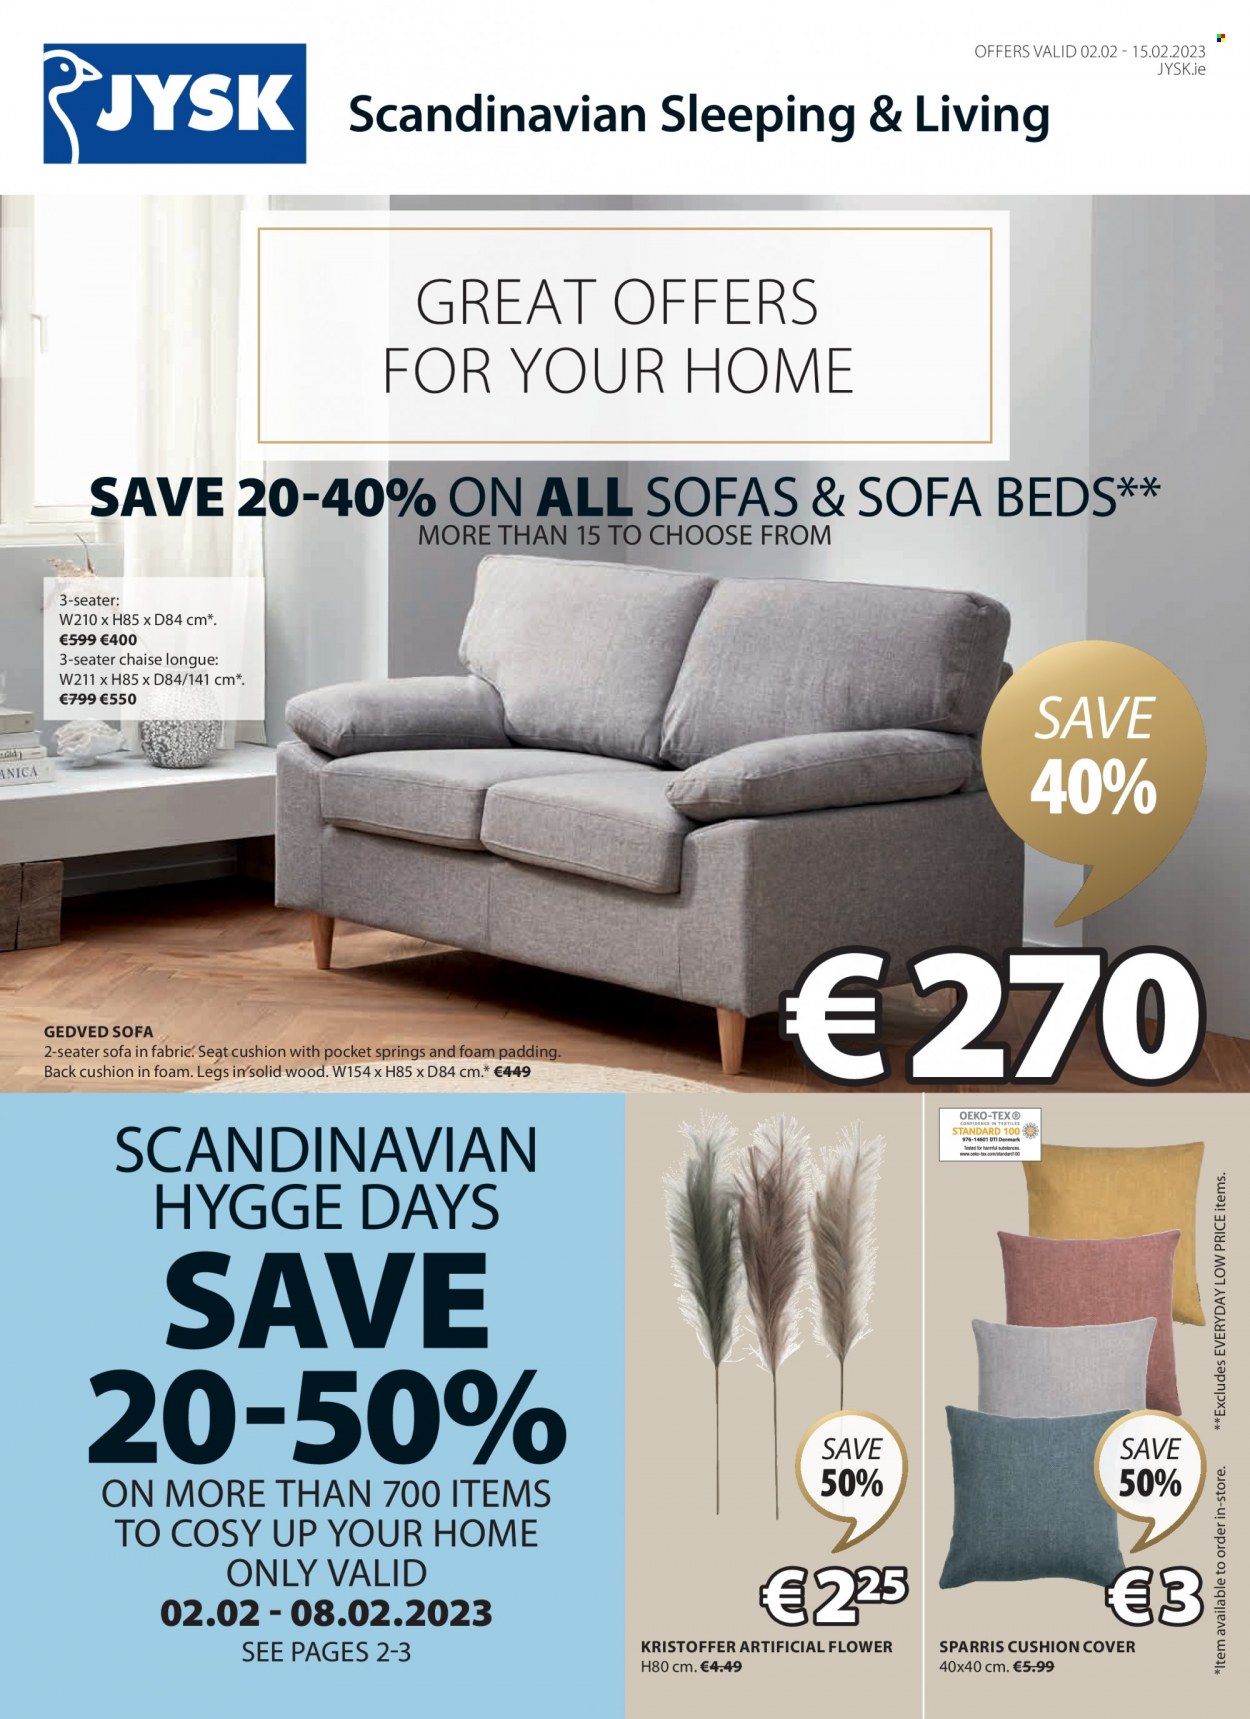 thumbnail - JYSK offer  - 02.02.2023 - 15.02.2023 - Sales products - sofa, chaise longue, bed, cushion, artificial flowers. Page 1.